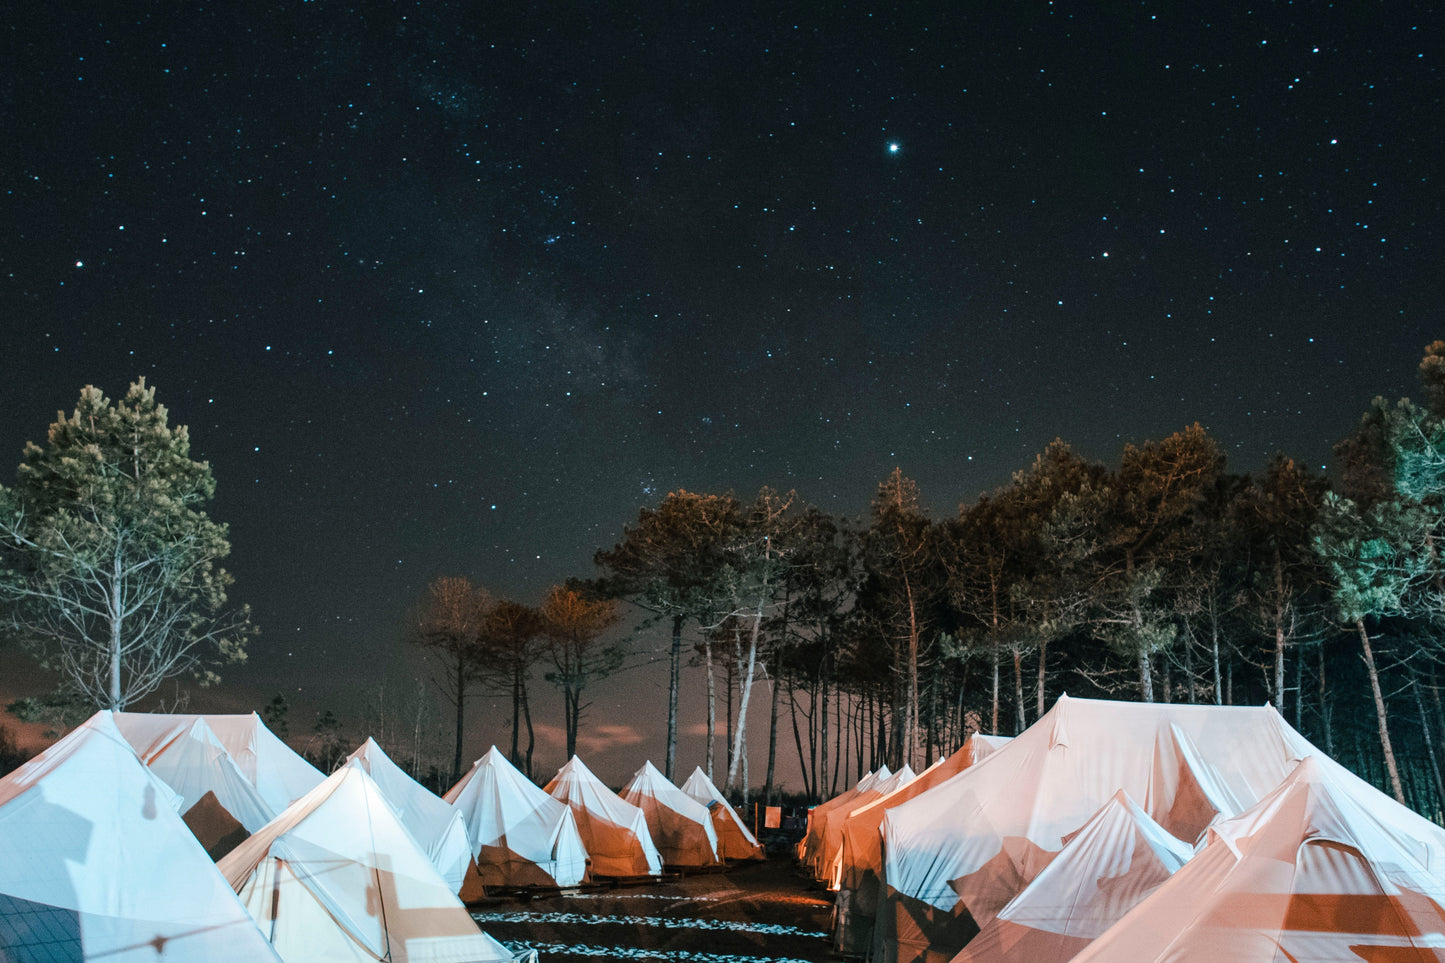 Starry night over the Dreamsea Surf Camp glamping tents in Portugal during small group travel.